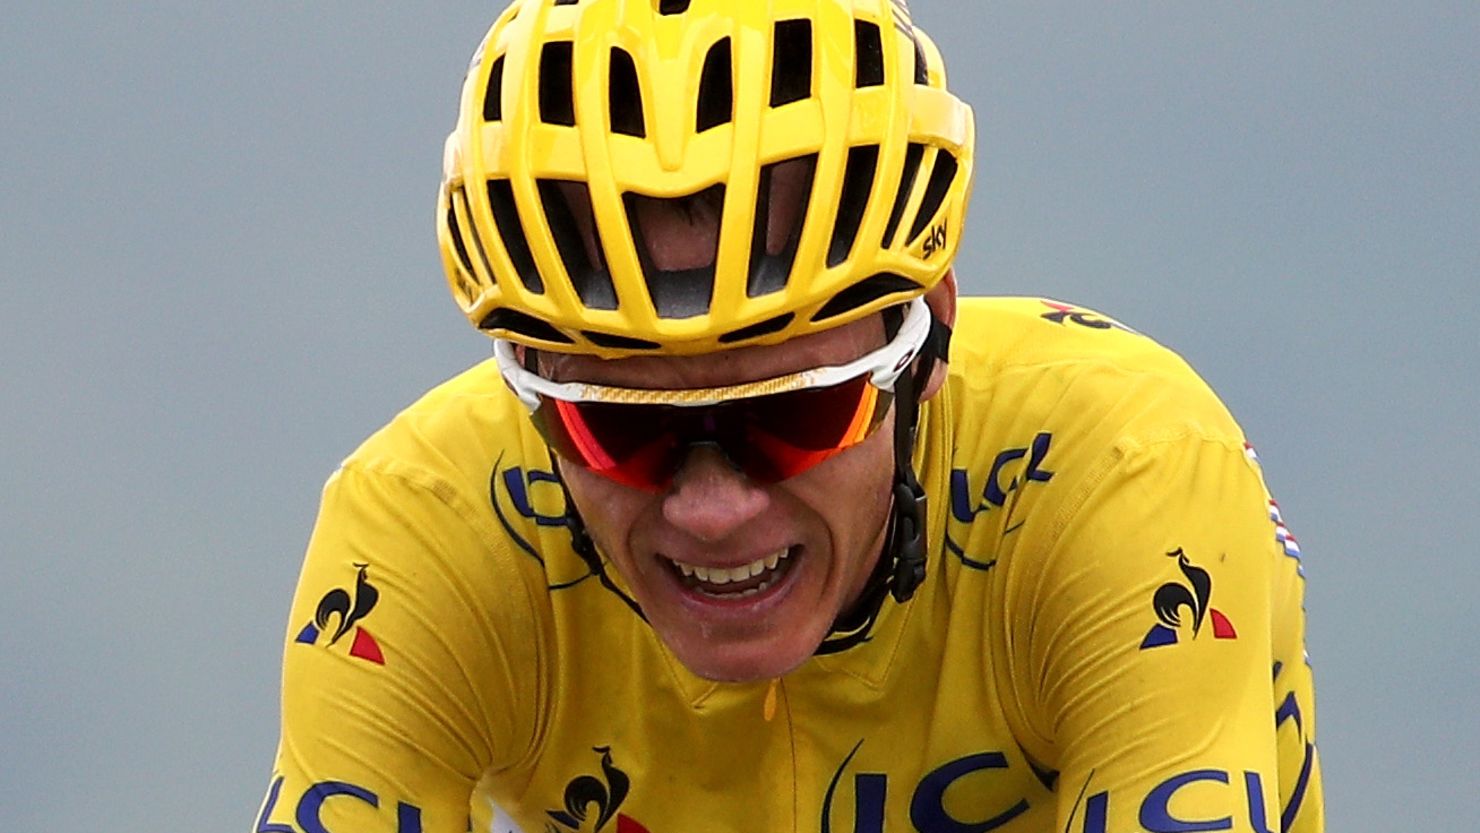 Only an accident or other calamity can prevent Chris Froome of Great Britain from winning his fourth Tour de France after he finished third in the time trial. 